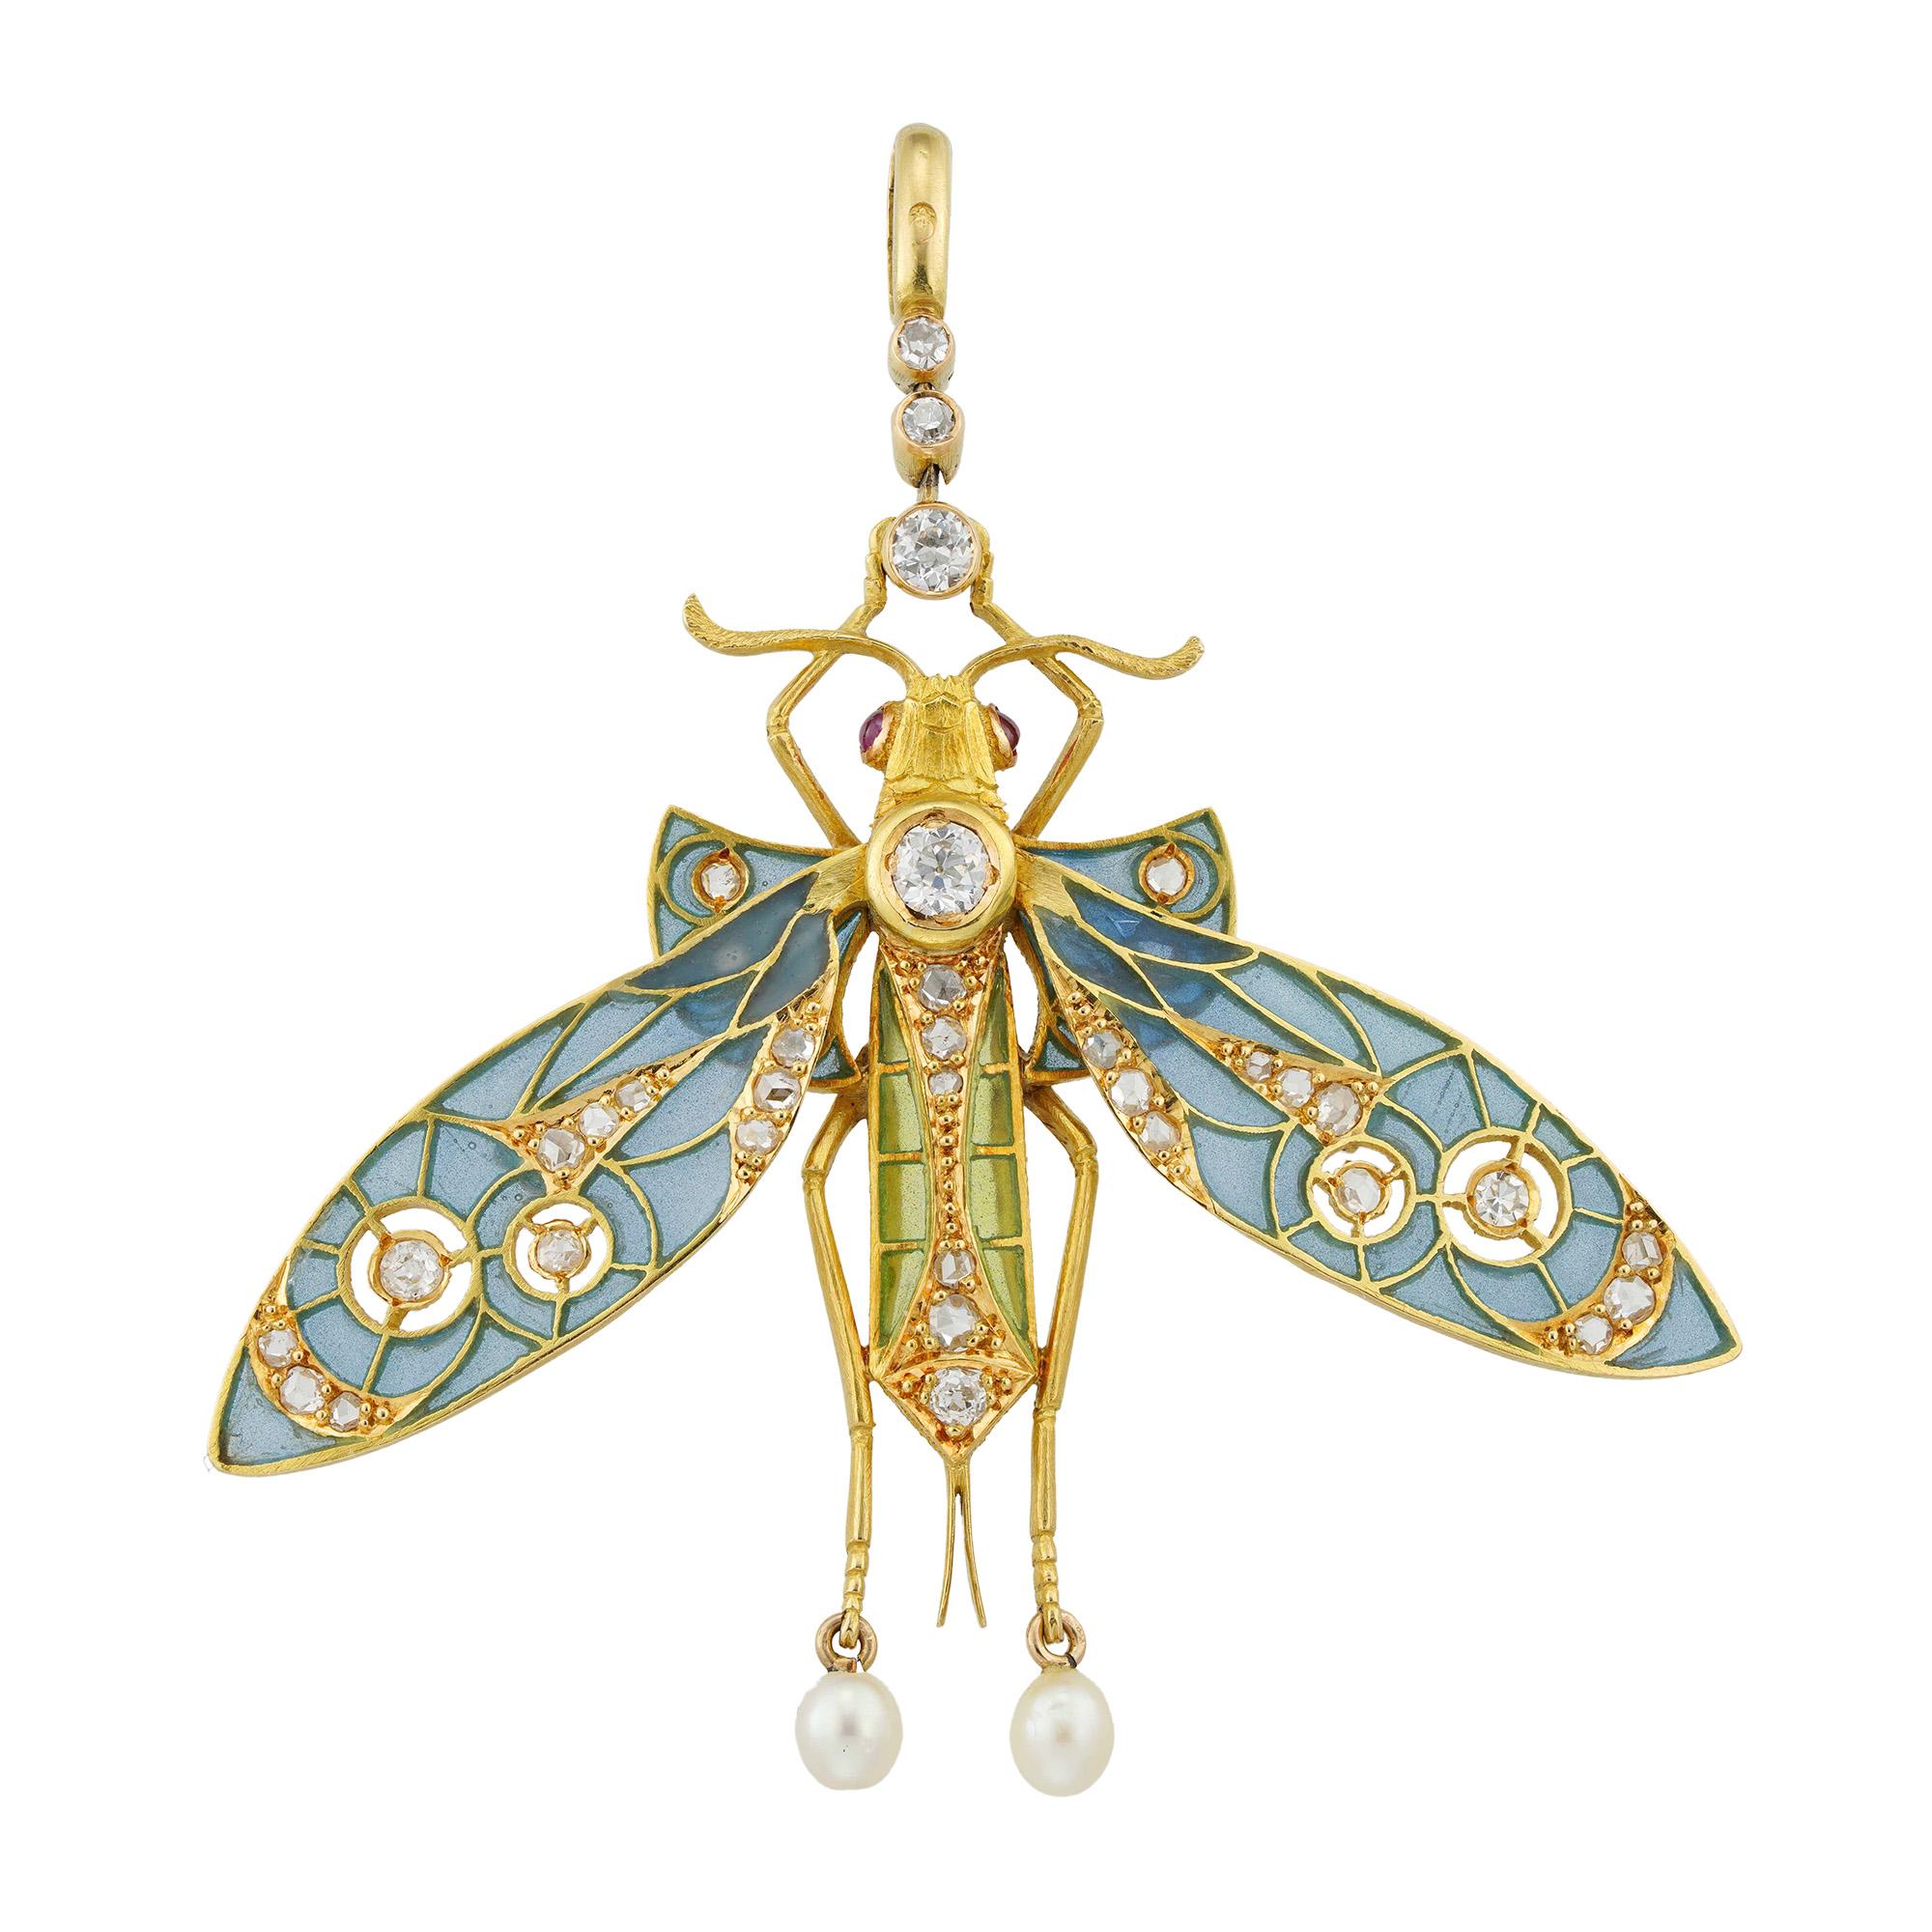 An Art Nouveau enamel and diamond dragonfly pendant, the body set with old European and rose-cut diamonds, and bearing green plique-à-jour enamel decorations, the head  with two cabochon-cut ruby-set eyes, the bottom legs terminating to two drop